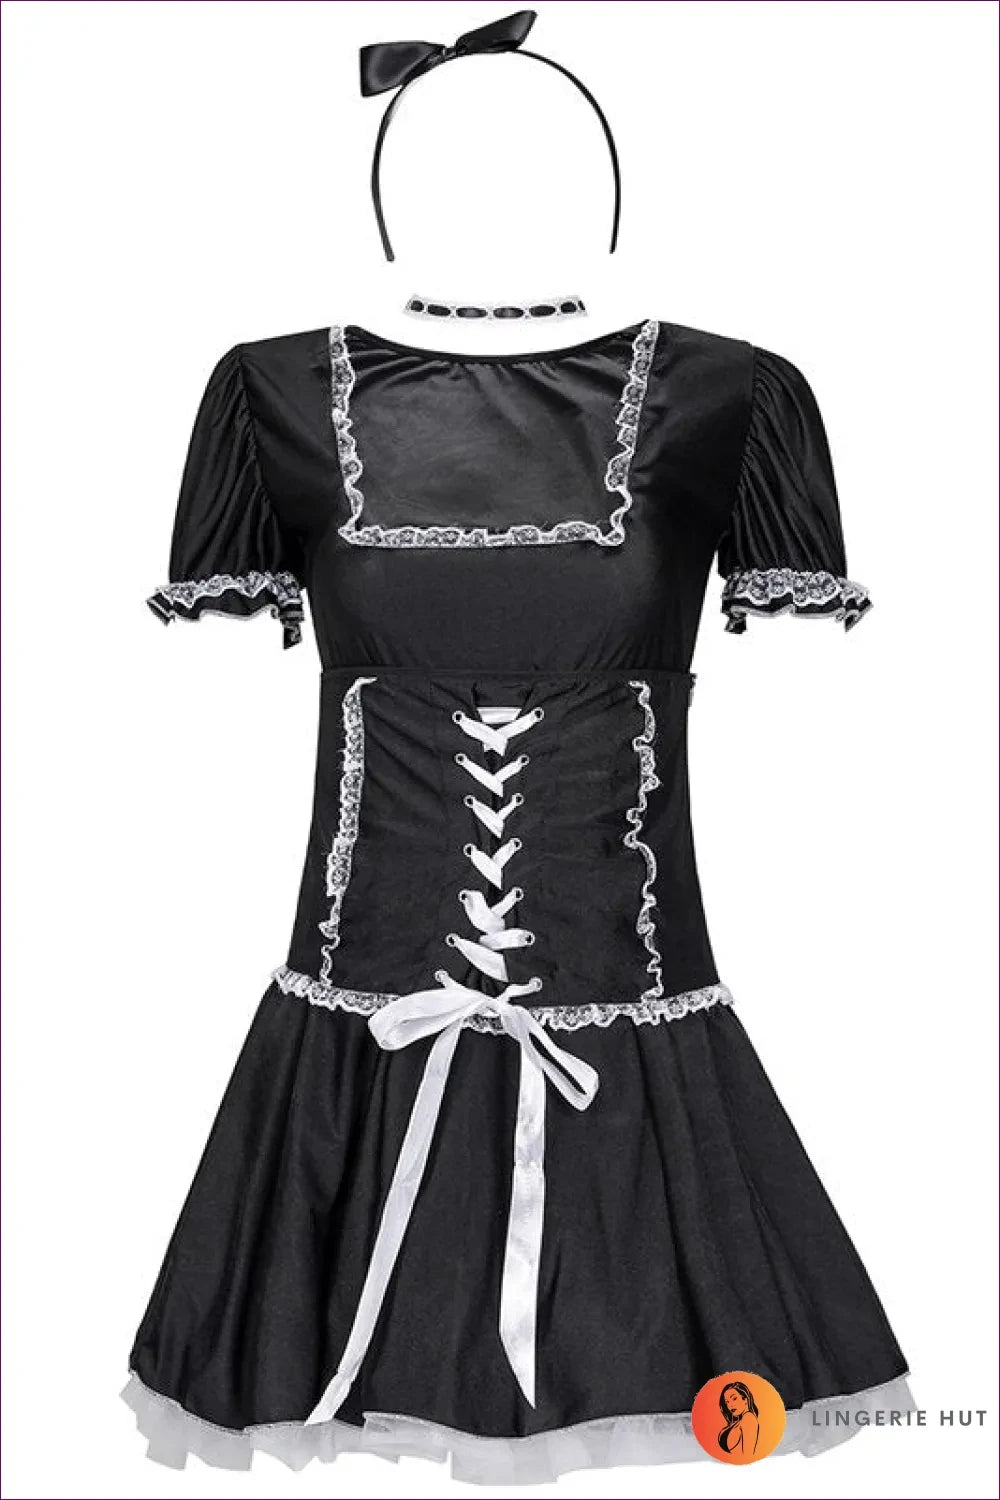 Embrace Playful Elegance With Our Enchanting French Maid Costume. Limited Stock! Style Tip: Pair Lace